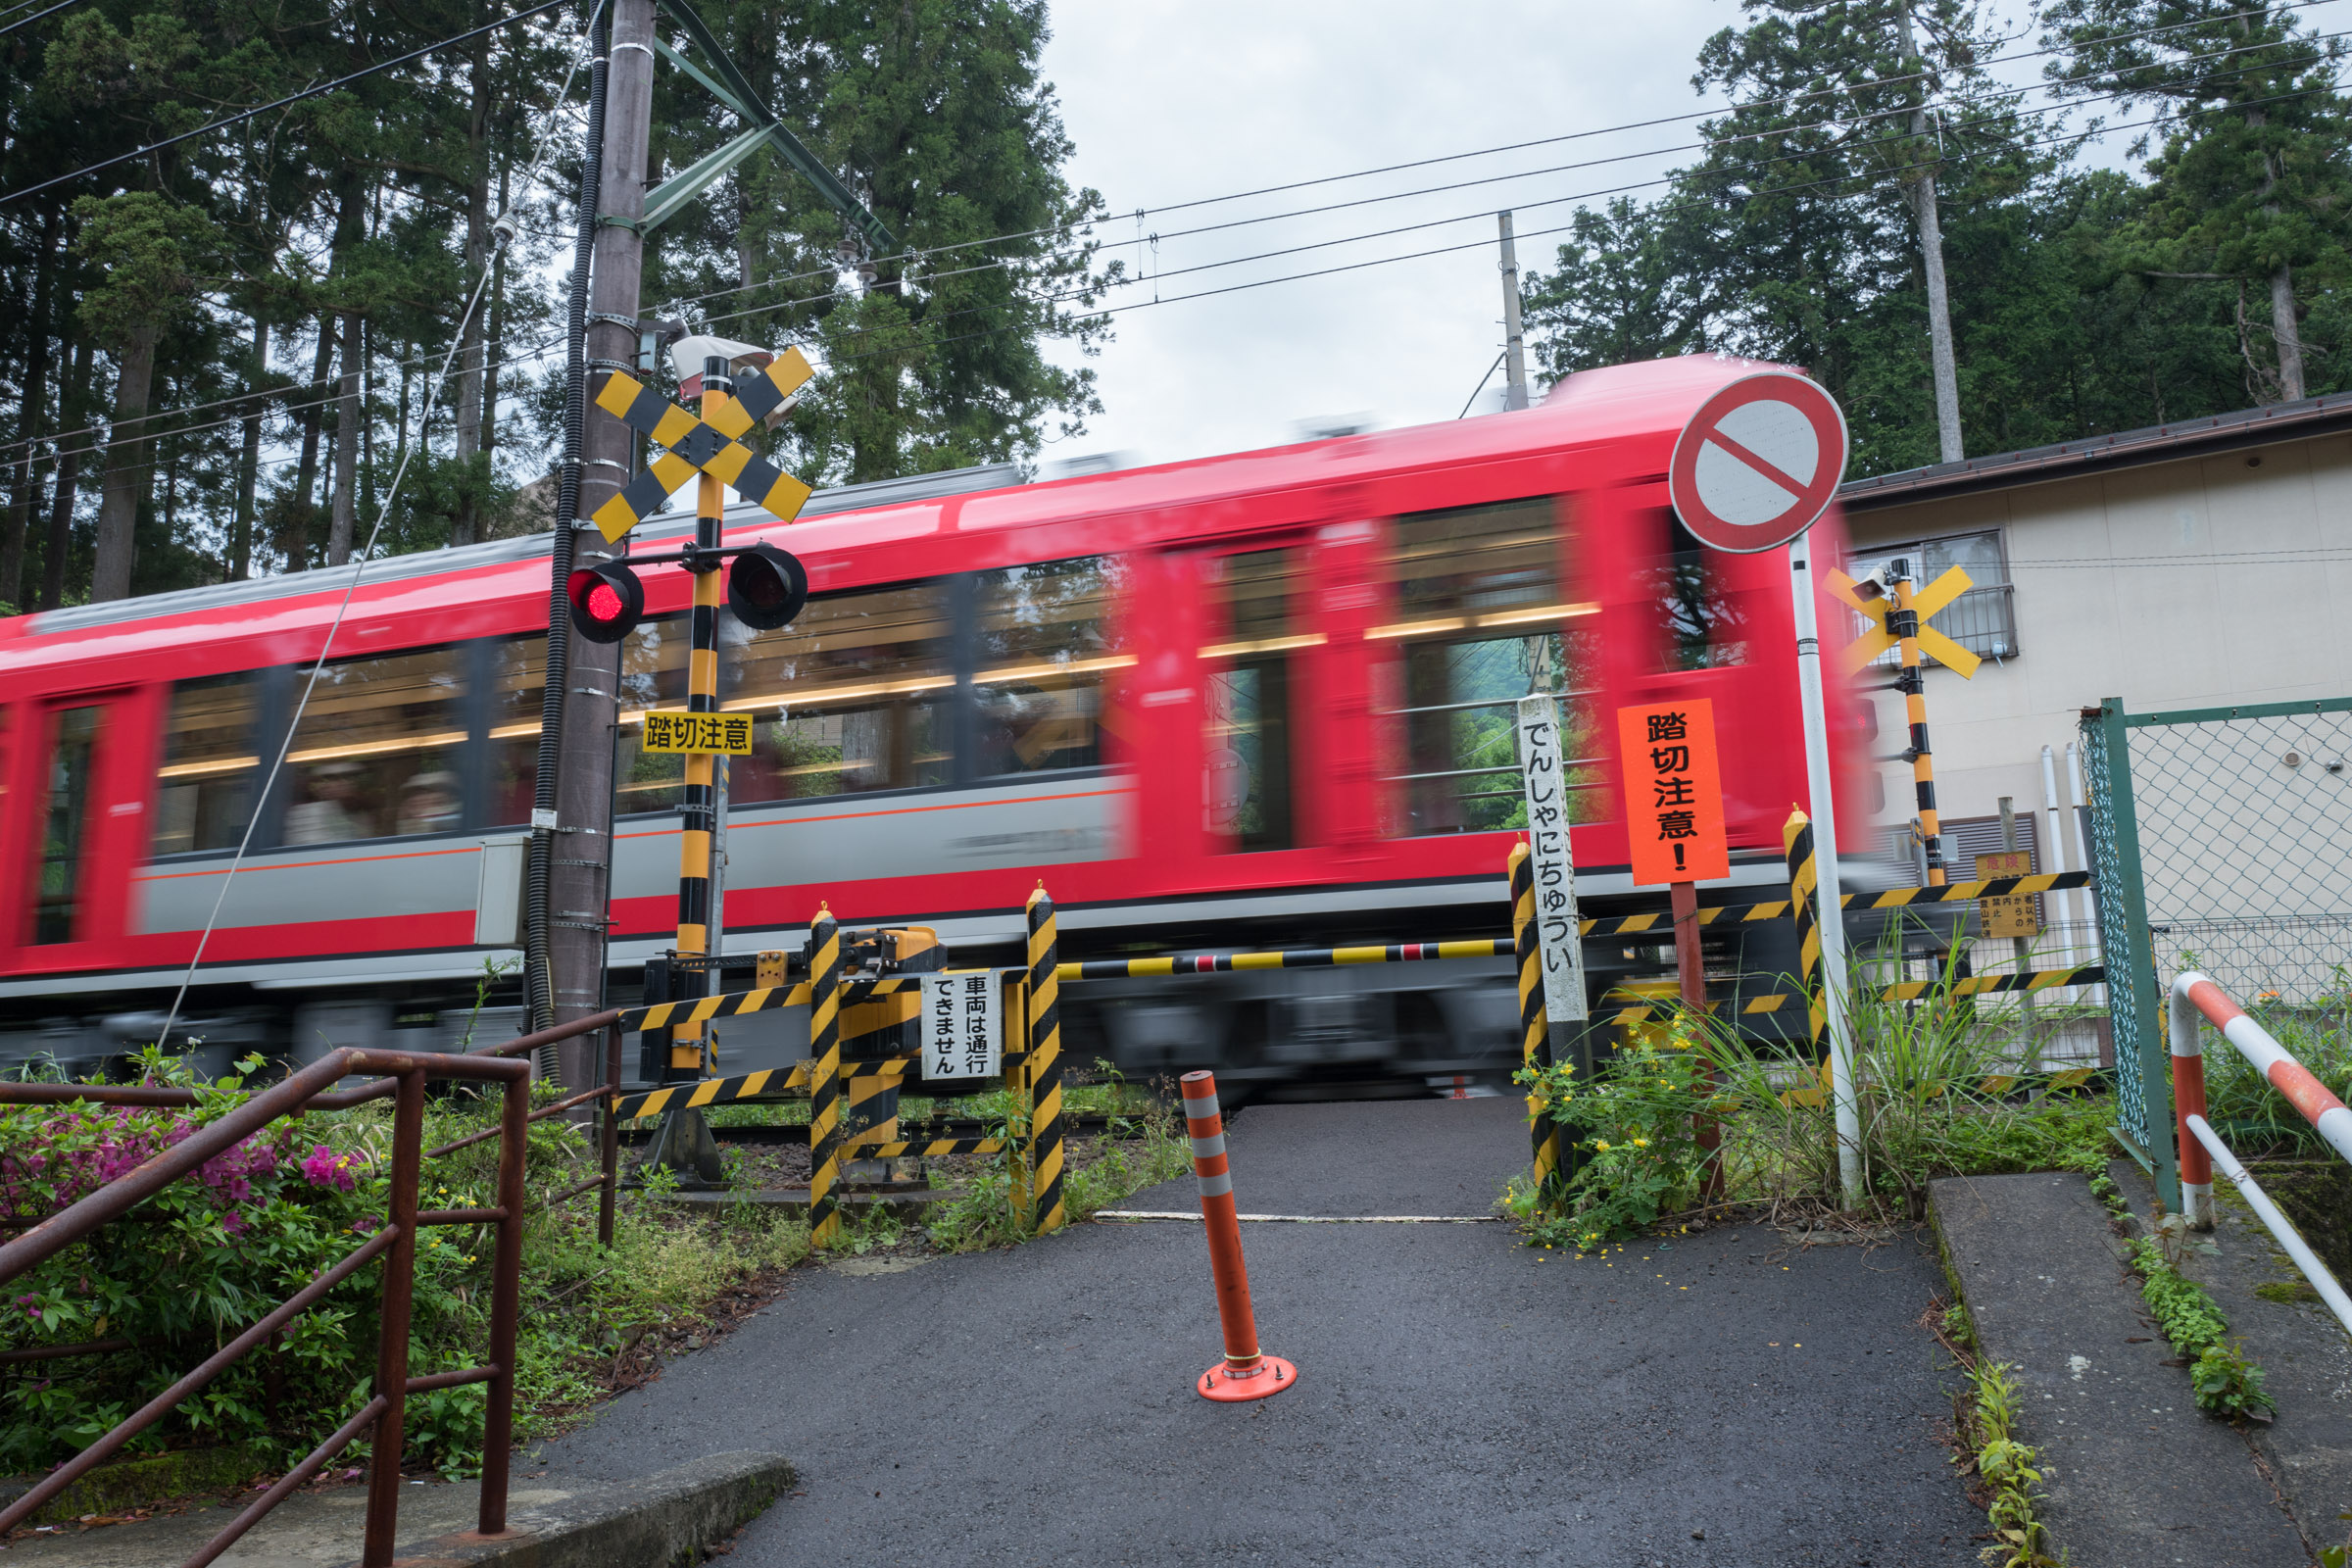 A train passing by the tracks in Hakone